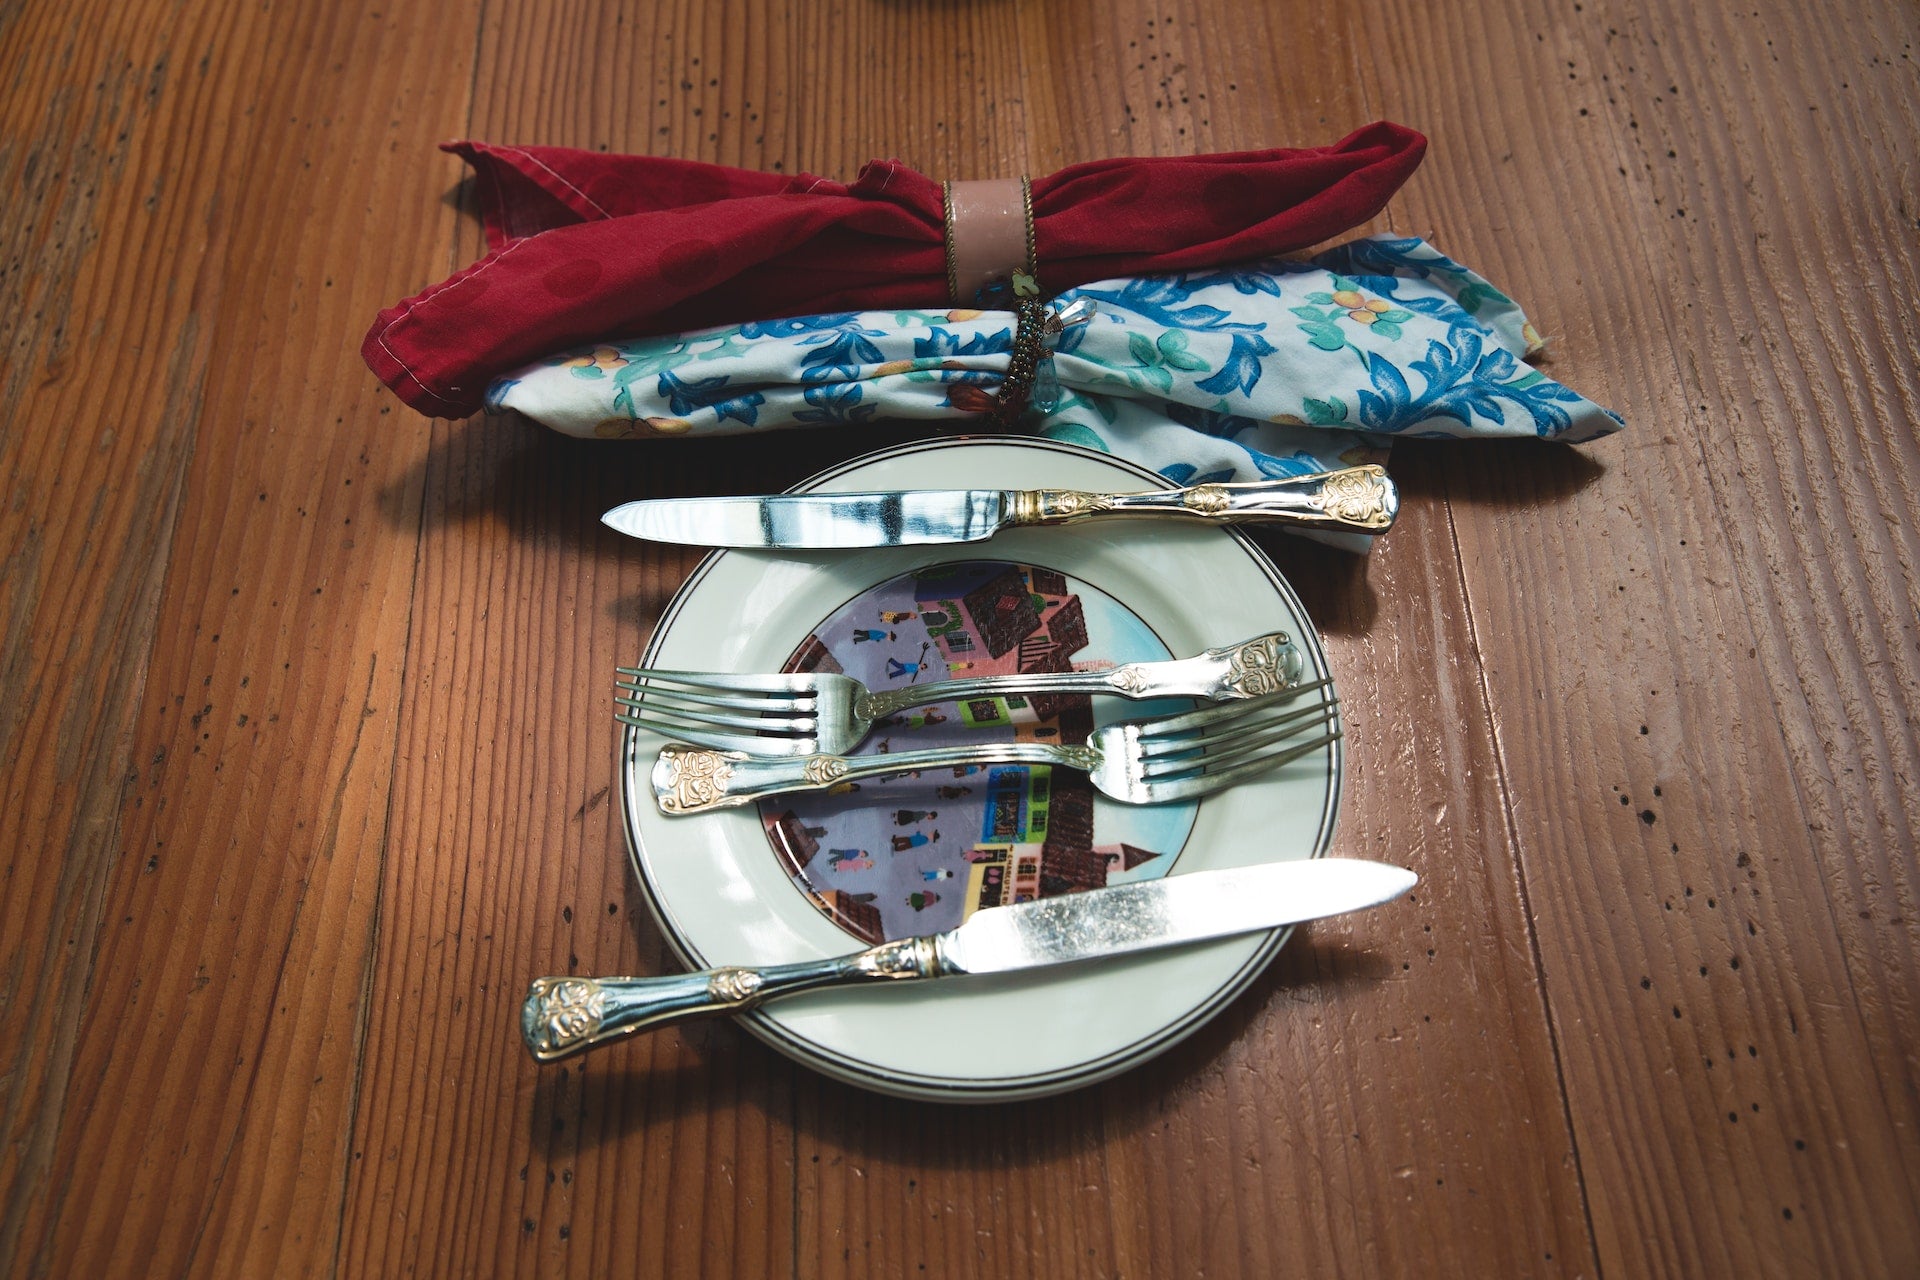 Silverware arranged on top of a dinner plate